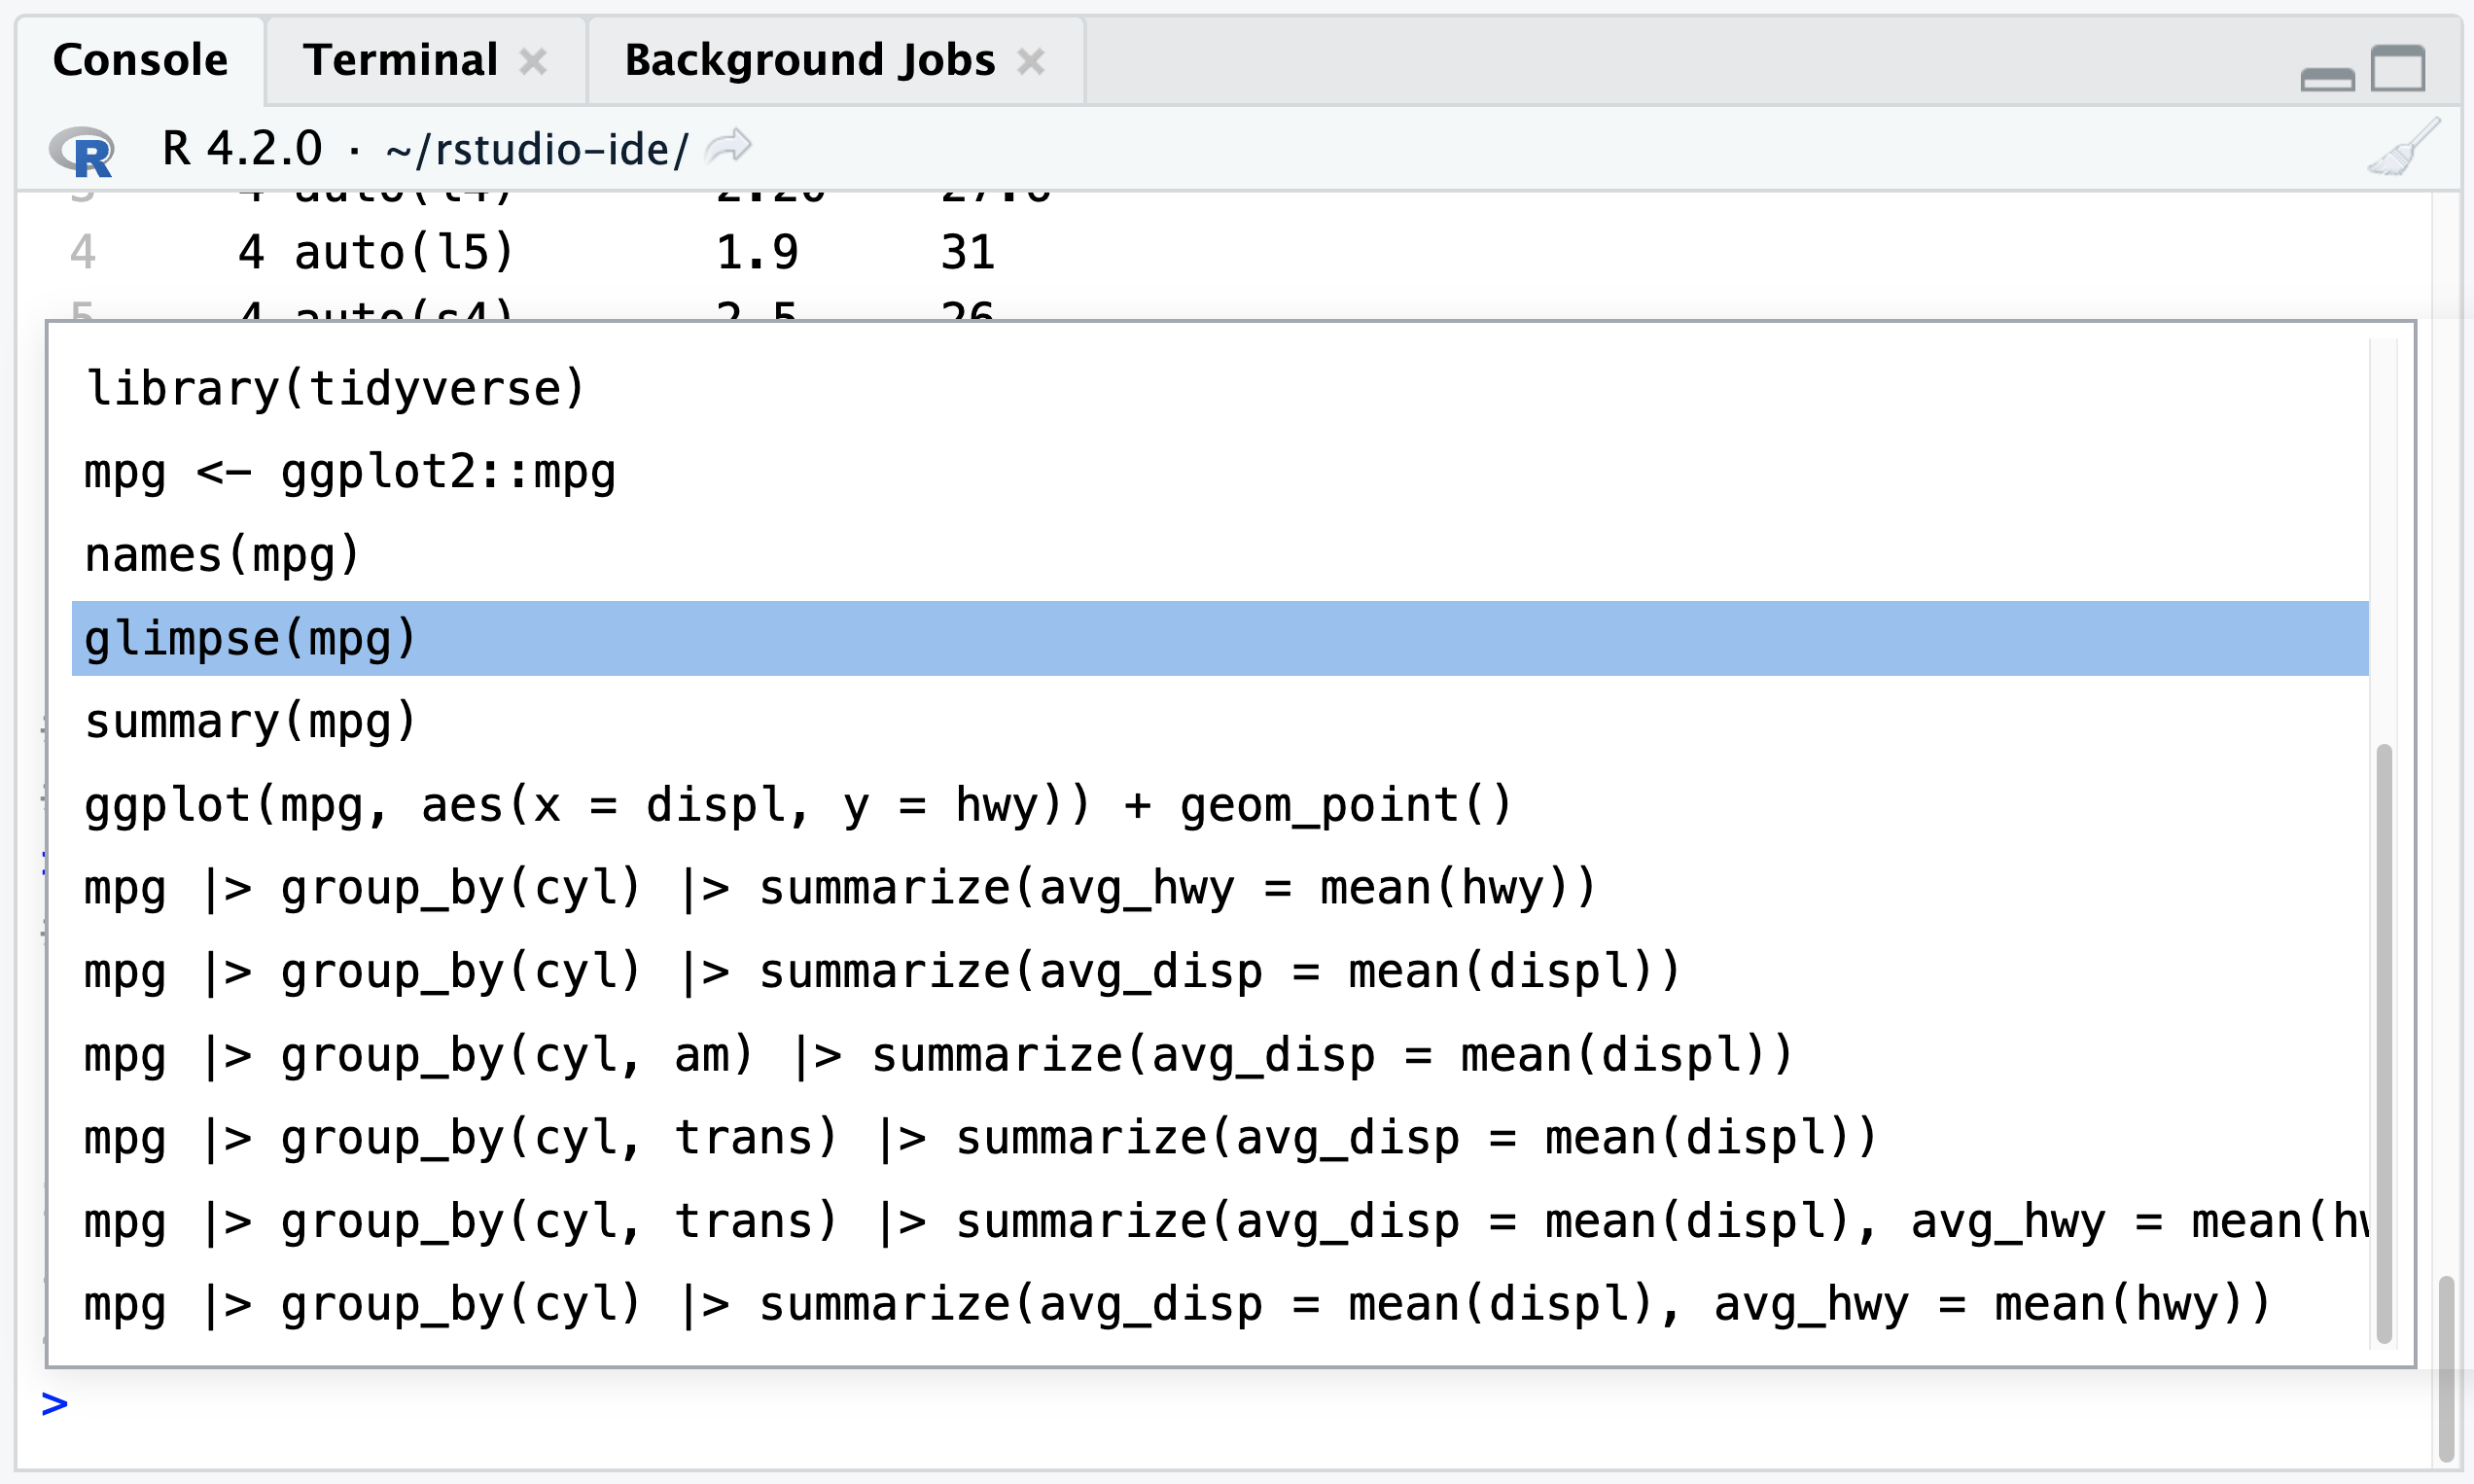 A screenshot of the history of commands executed in the RStudio console.